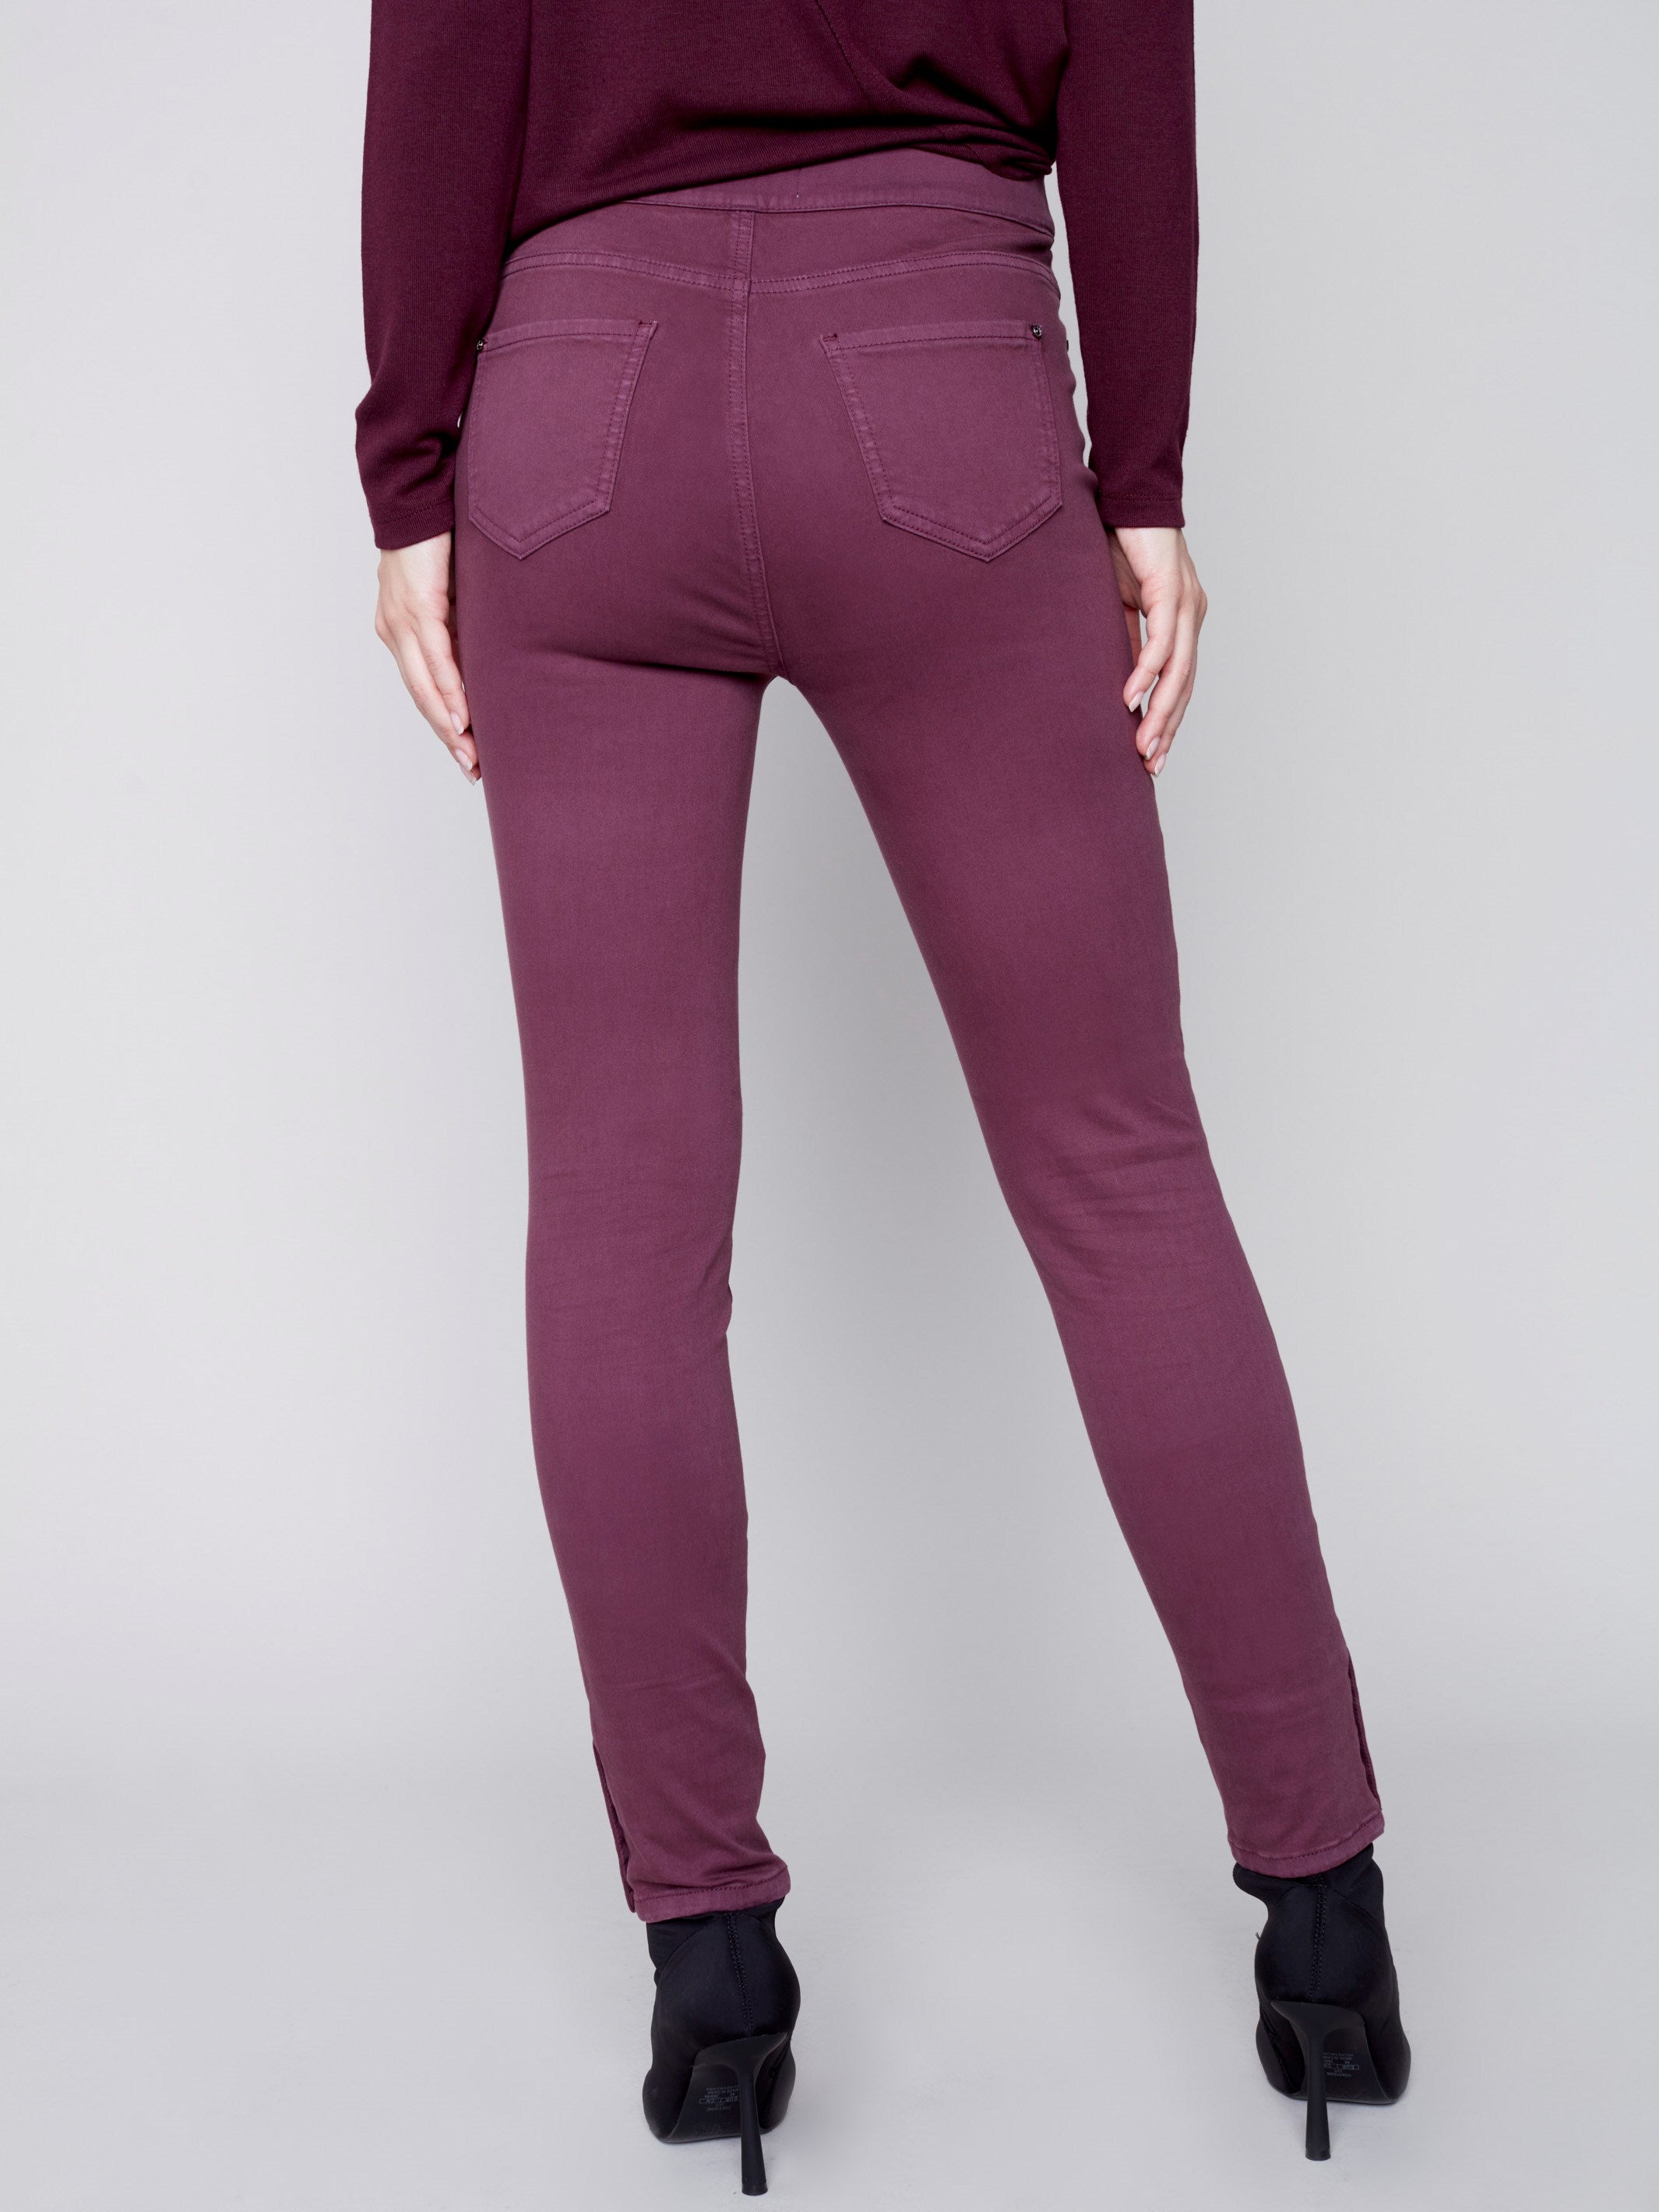 Pull-On Twill Pants with Snap Button Hem - Port